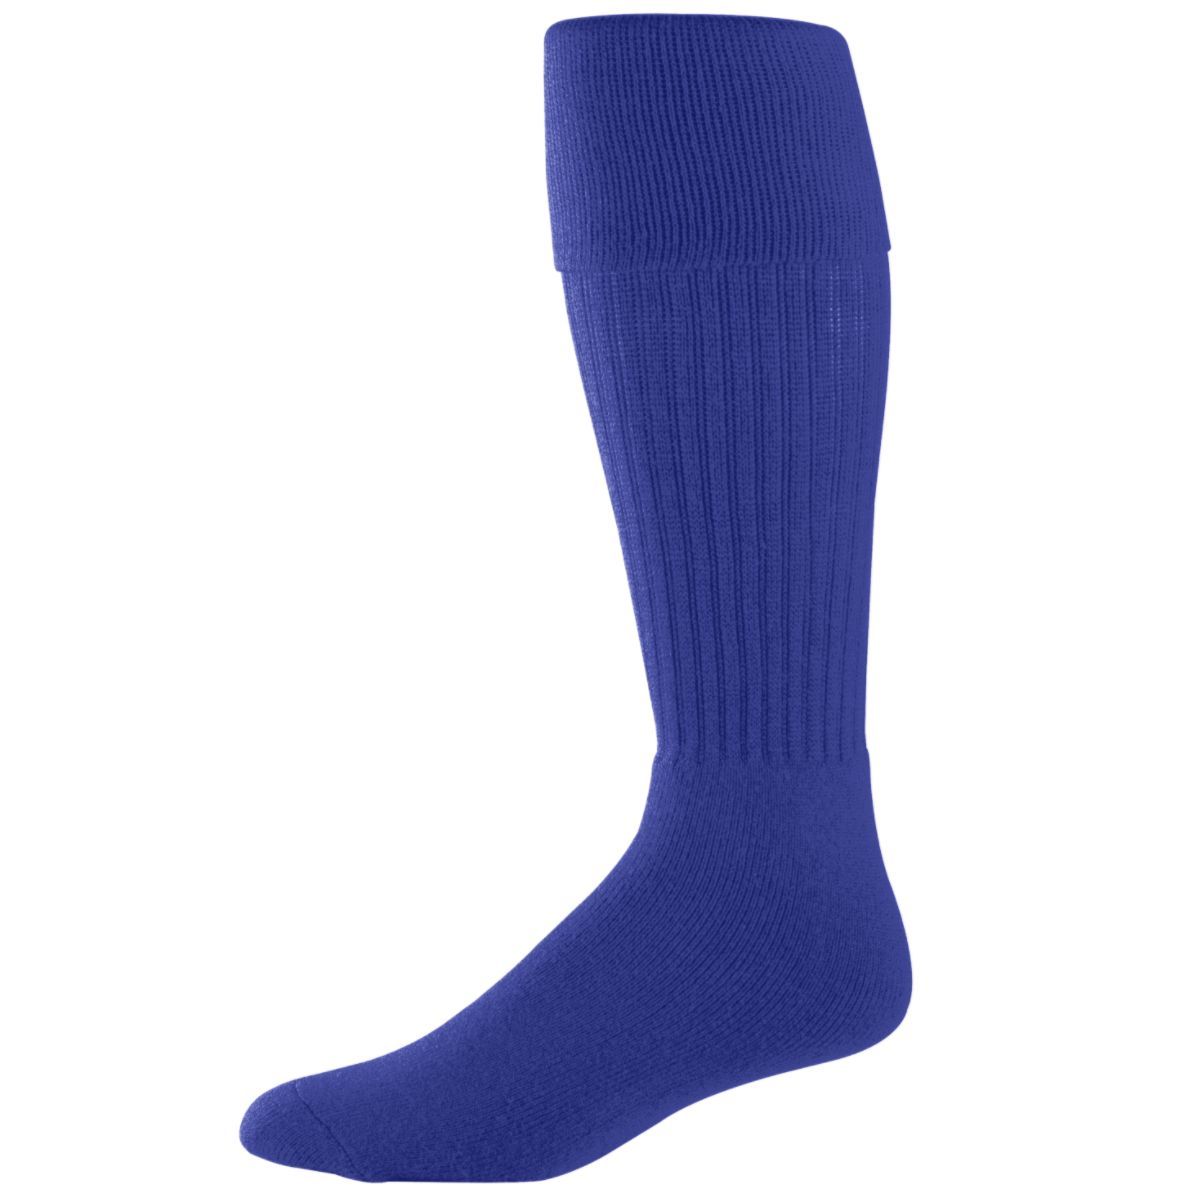 Augusta Sportswear Soccer Sock in Purple  -Part of the Accessories, Augusta-Products, Accessories-Socks, Soccer, All-Sports-1 product lines at KanaleyCreations.com